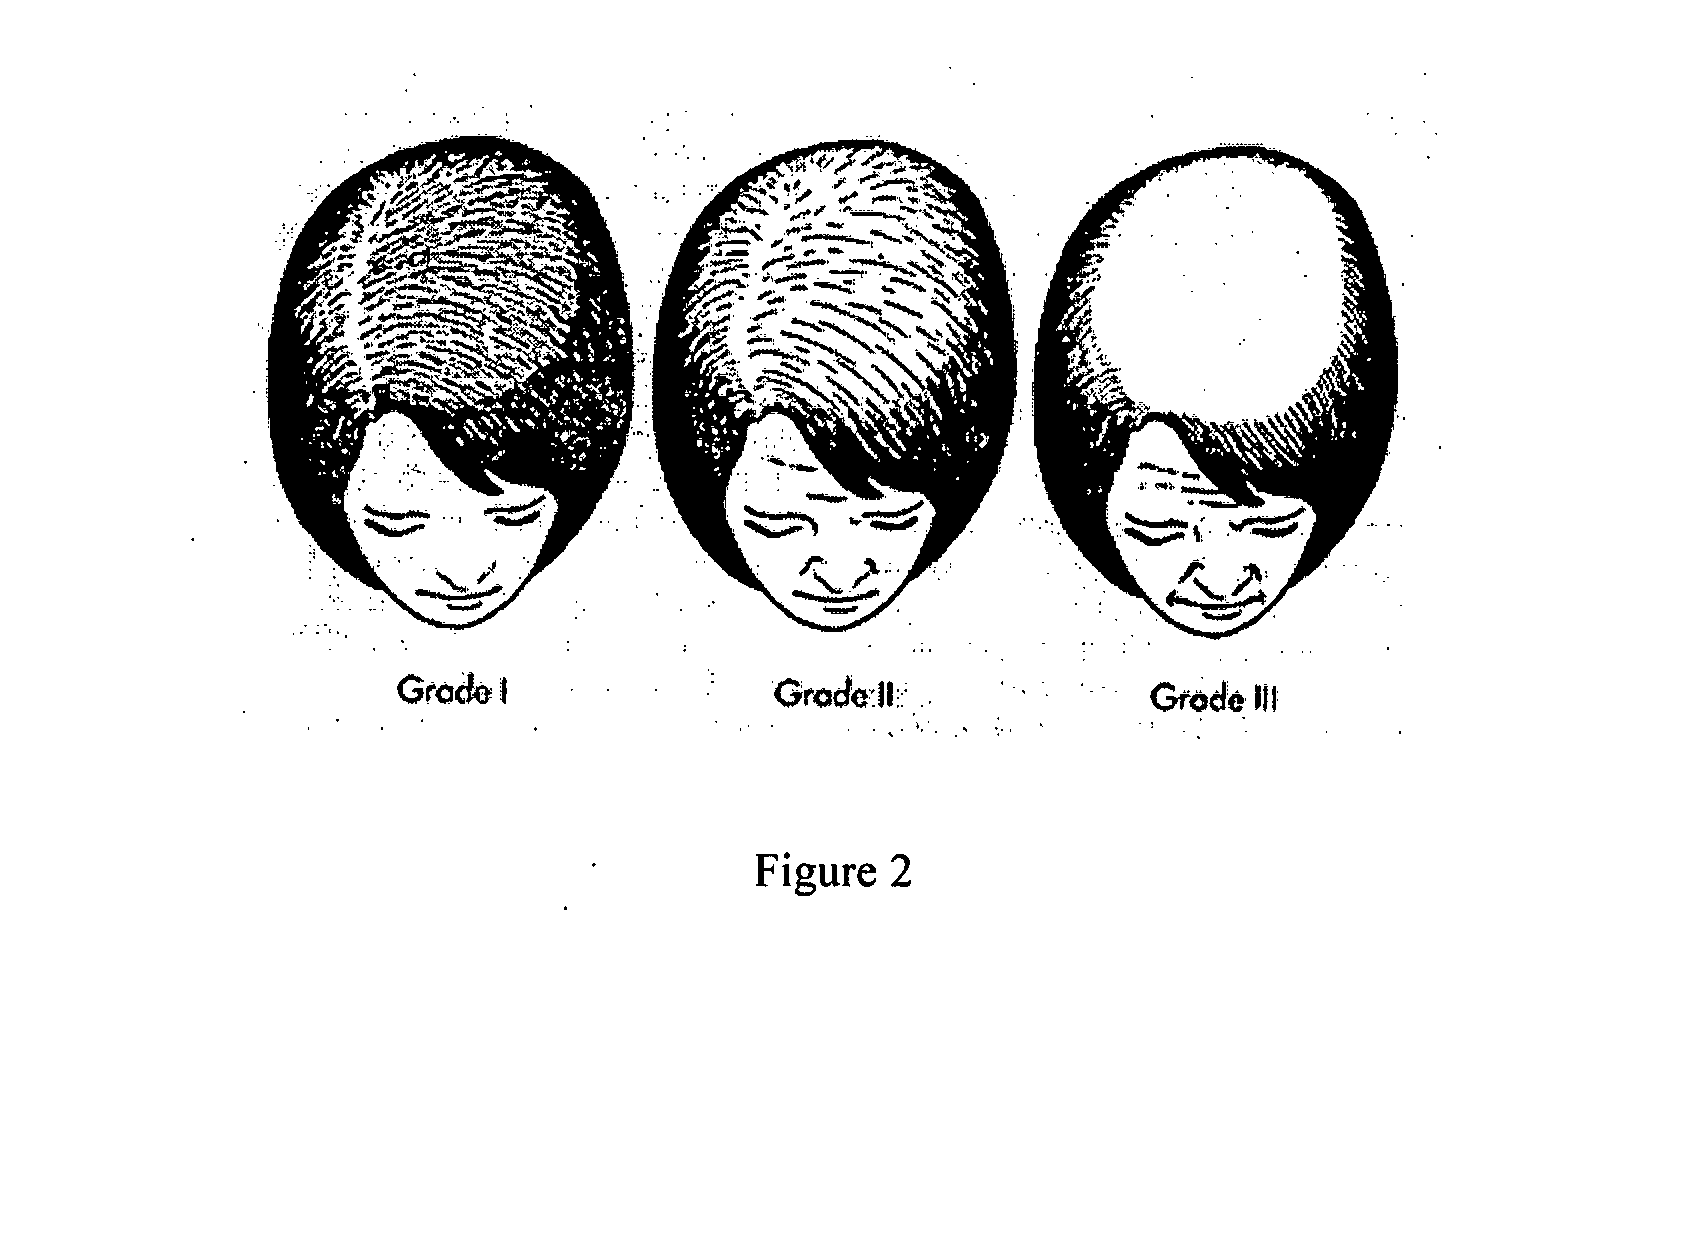 Composition and method for an intradermal hair growth solution